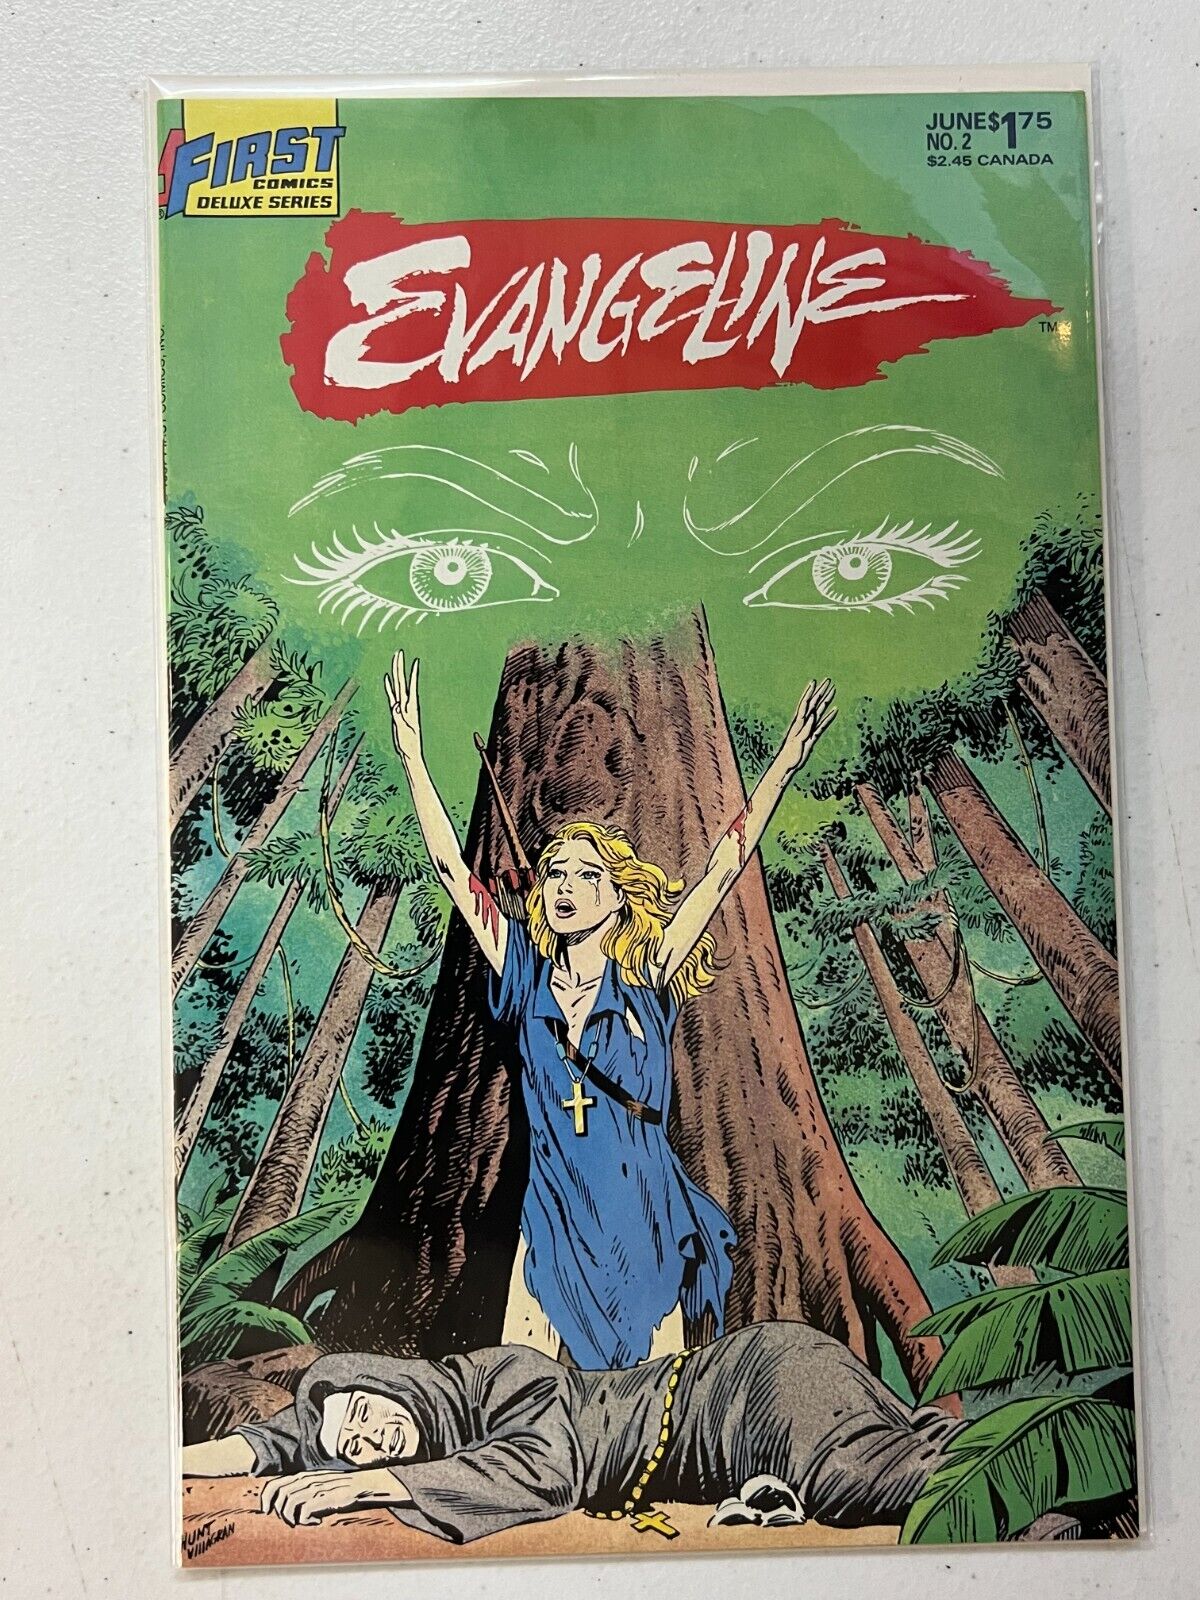 EVANGELINE #2 1FIRST COMICS JULY 1987 | Combined Shipping B&B